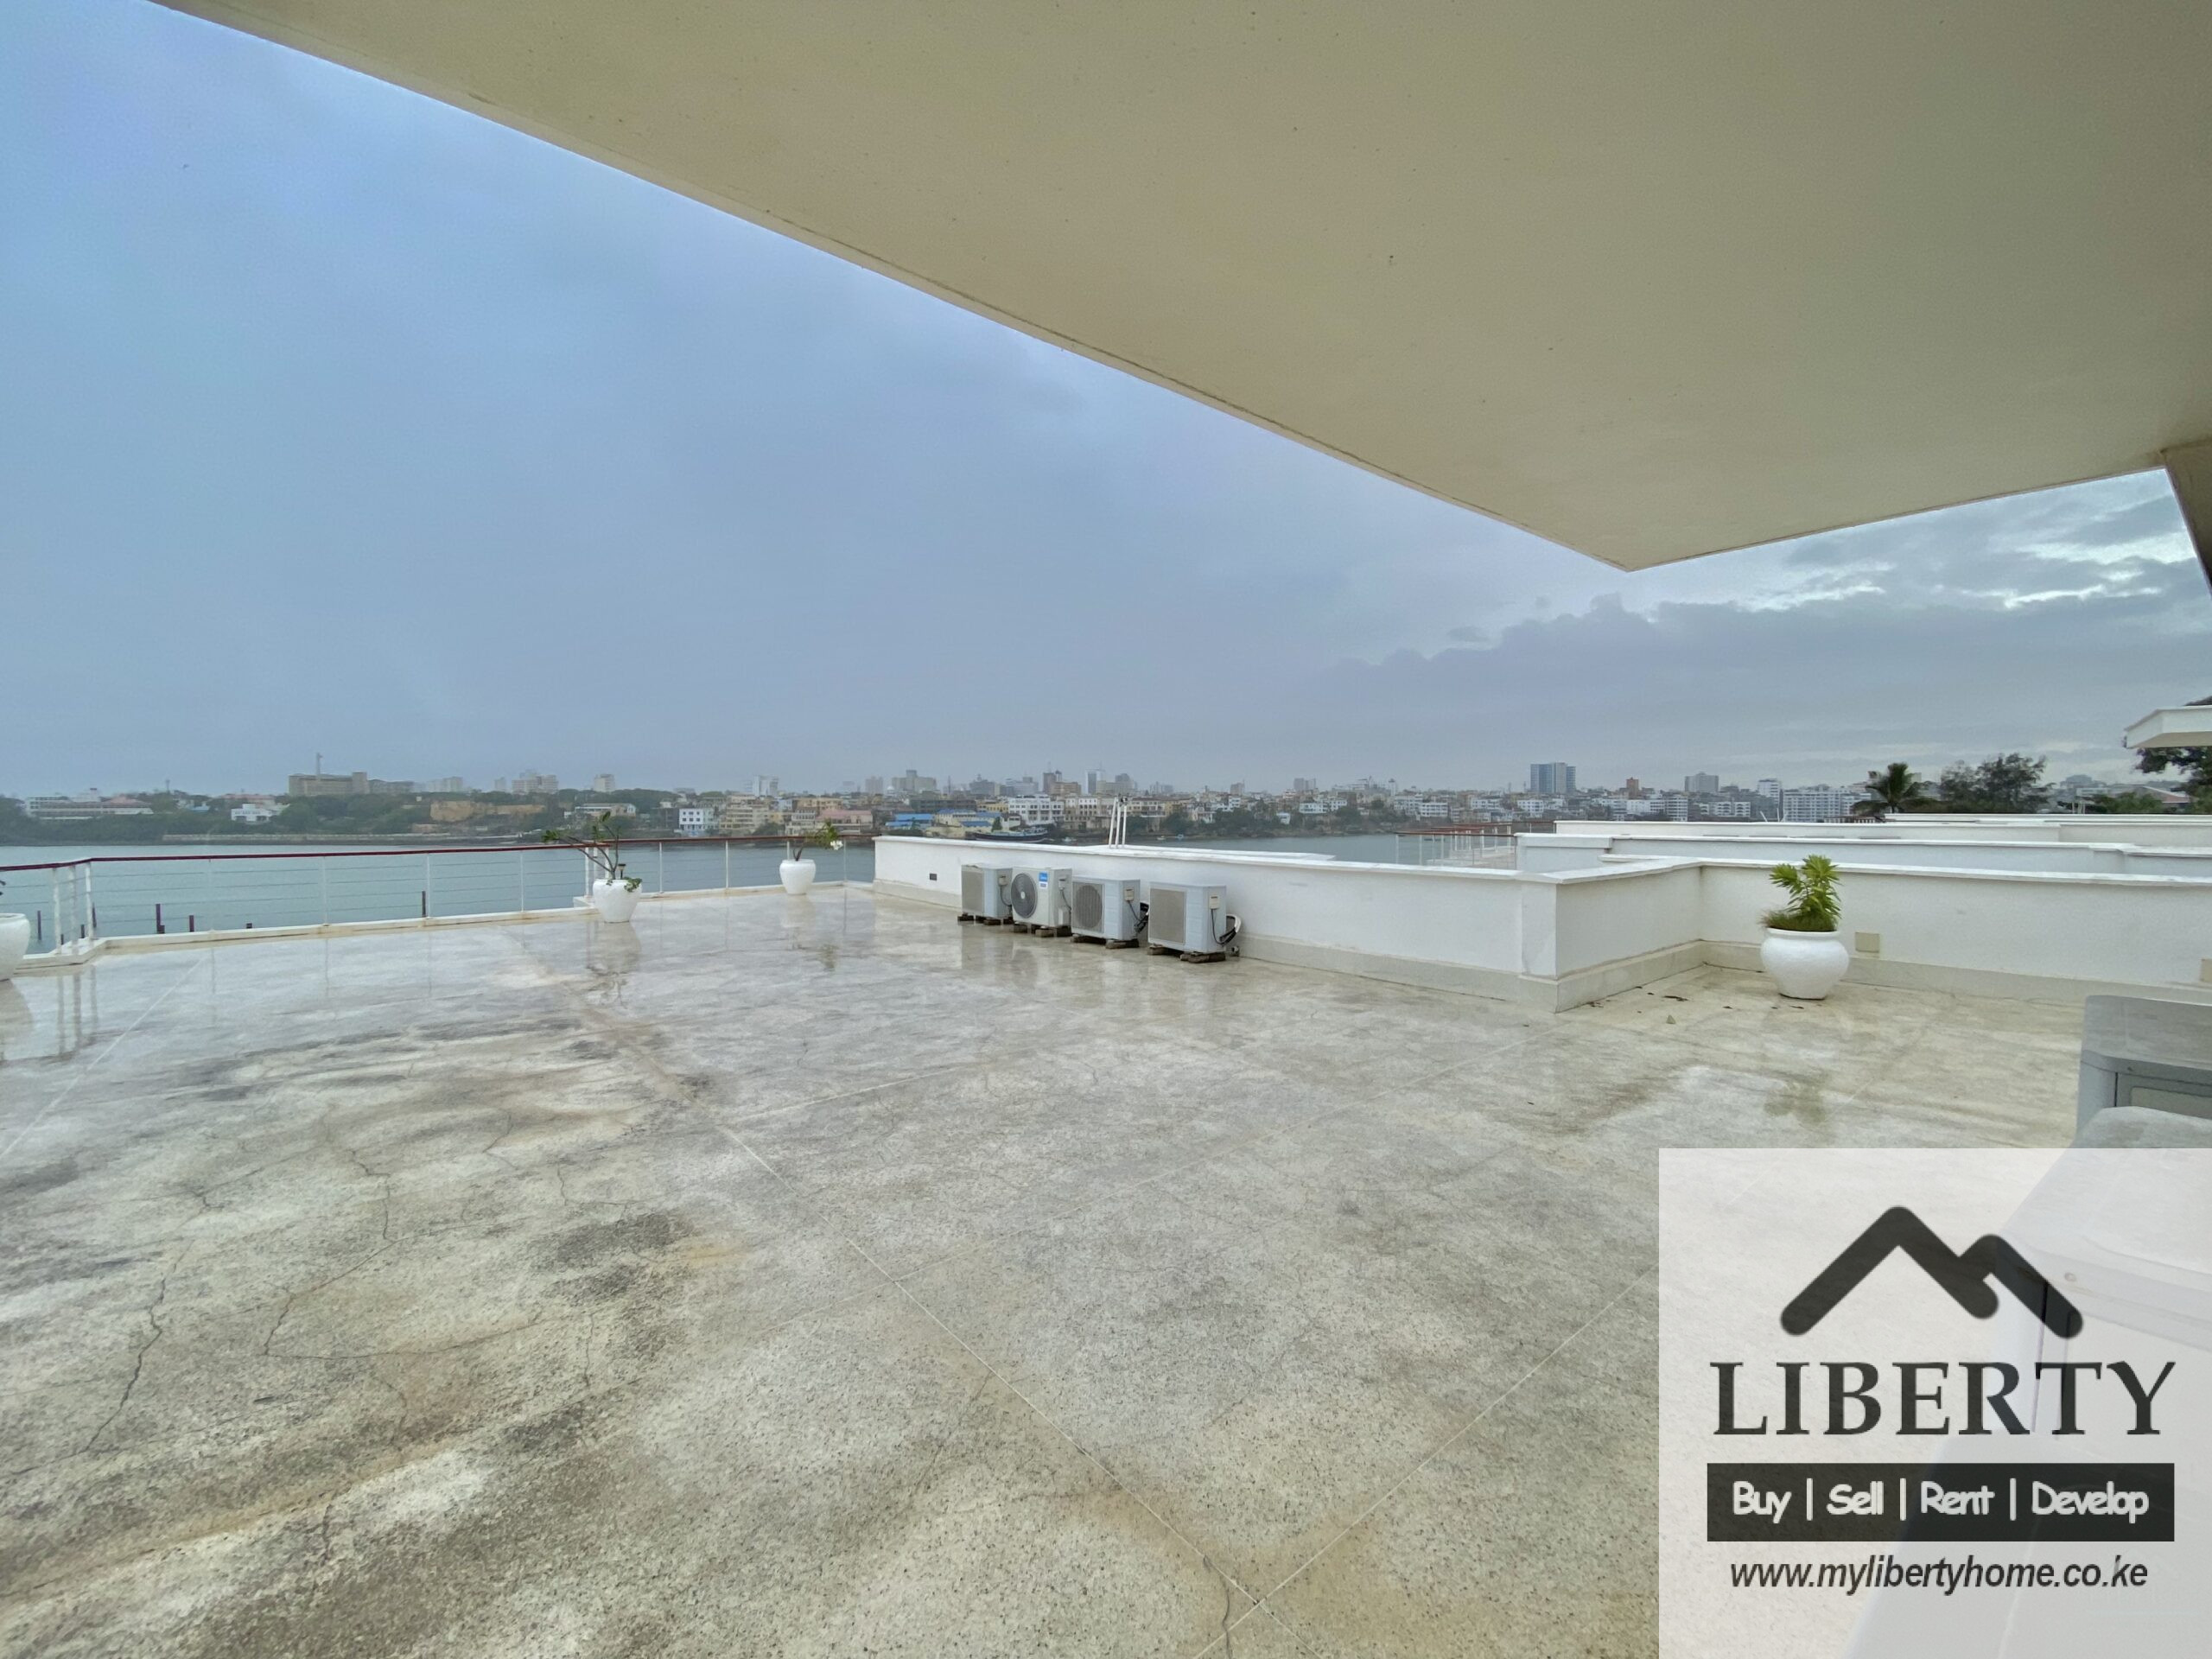 A Deluxe Beachfront 3 Bedroom Furnished Apartment In Mombasa-Nyali For Rent-250K- Ref-784